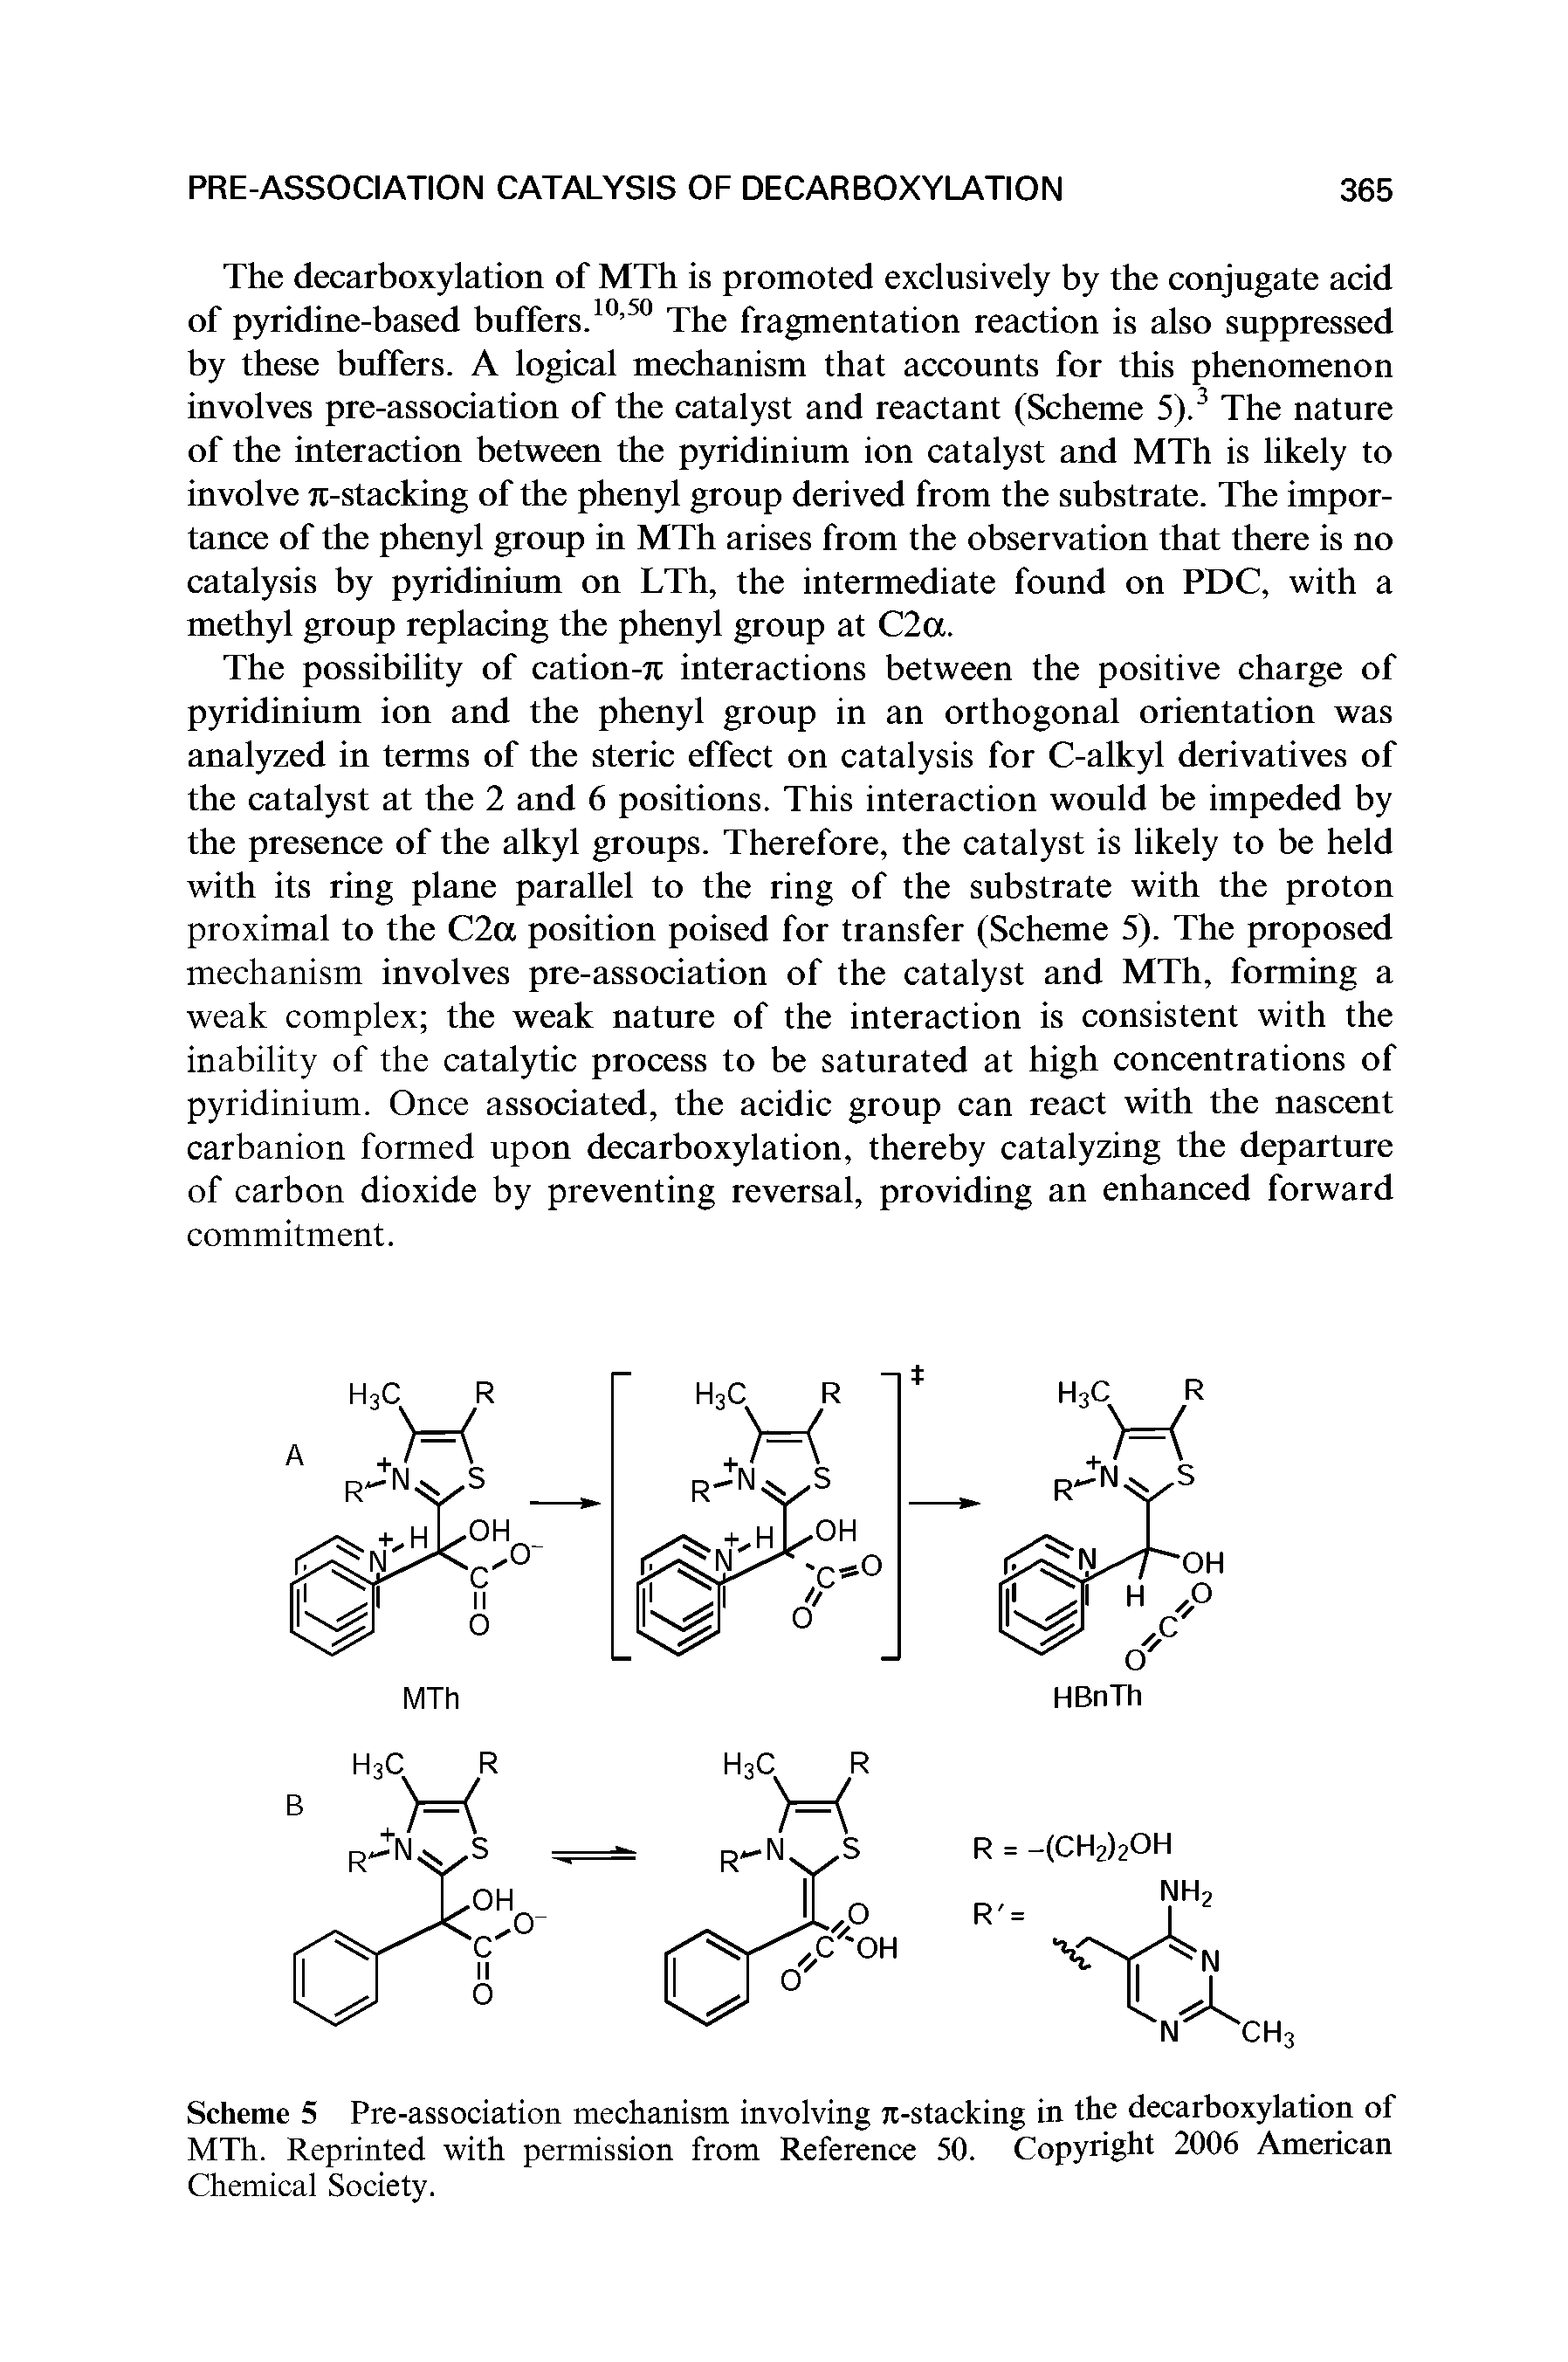 Scheme 5 Pre-association mechanism involving 7i-stacking in the decarboxylation of MTh. Reprinted with permission from Reference 50. Copyright 2006 American Chemical Society.